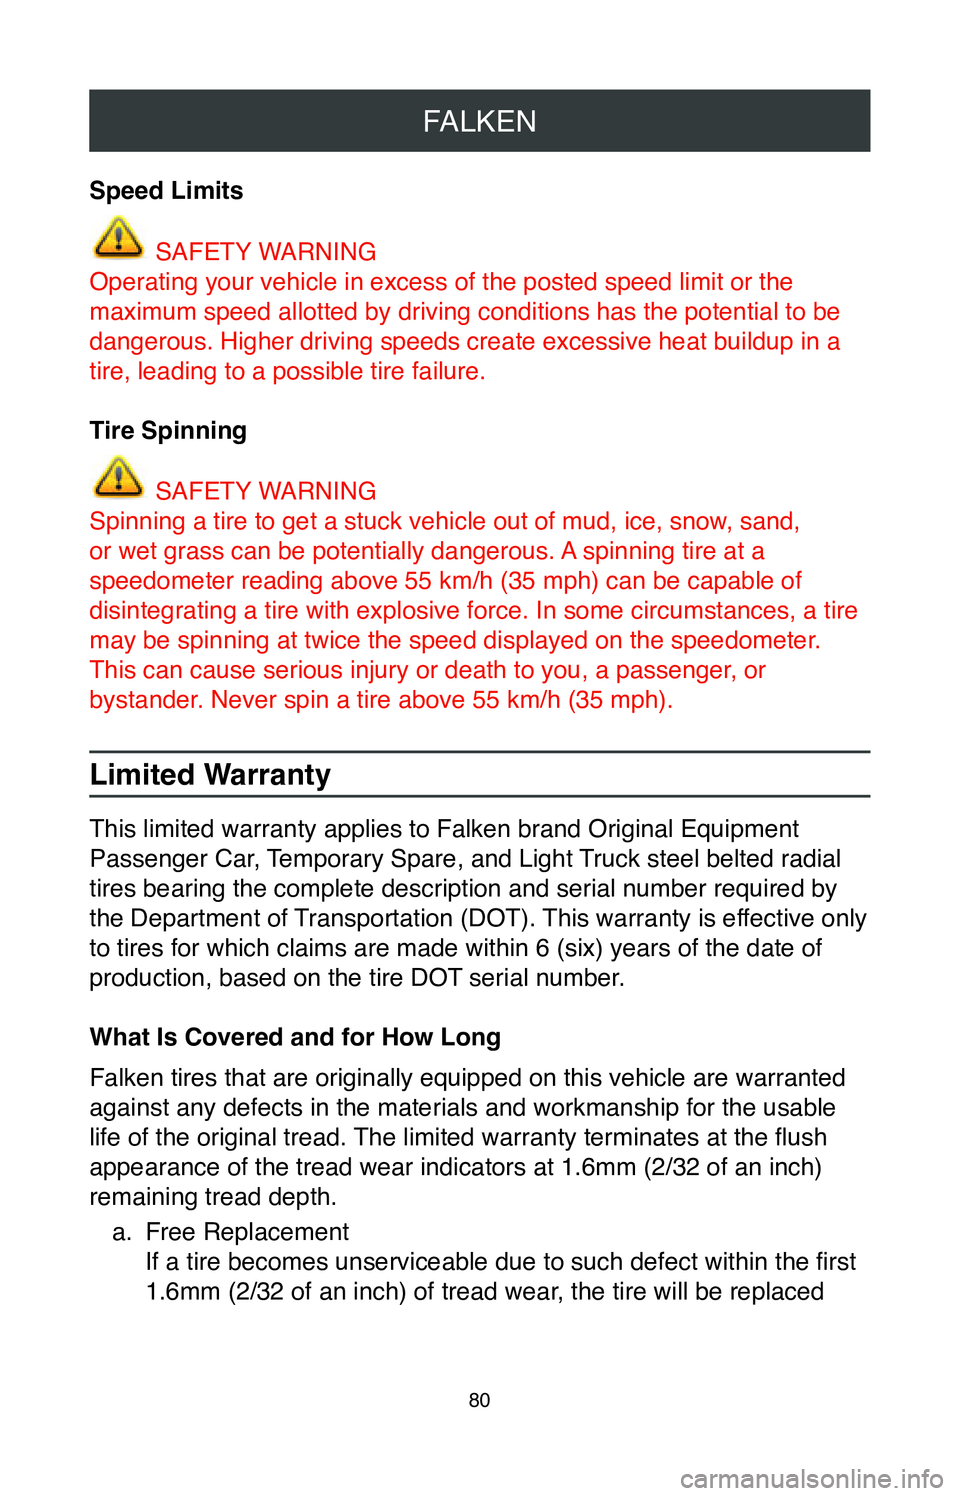 TOYOTA COROLLA 2020  Warranties & Maintenance Guides (in English) FALKEN
80
Speed Limits
 SAFETY WARNING
Operating your vehicle in excess of the posted speed limit or the 
maximum speed allotted by driving conditions has the potential to be 
dangerous. Higher drivin